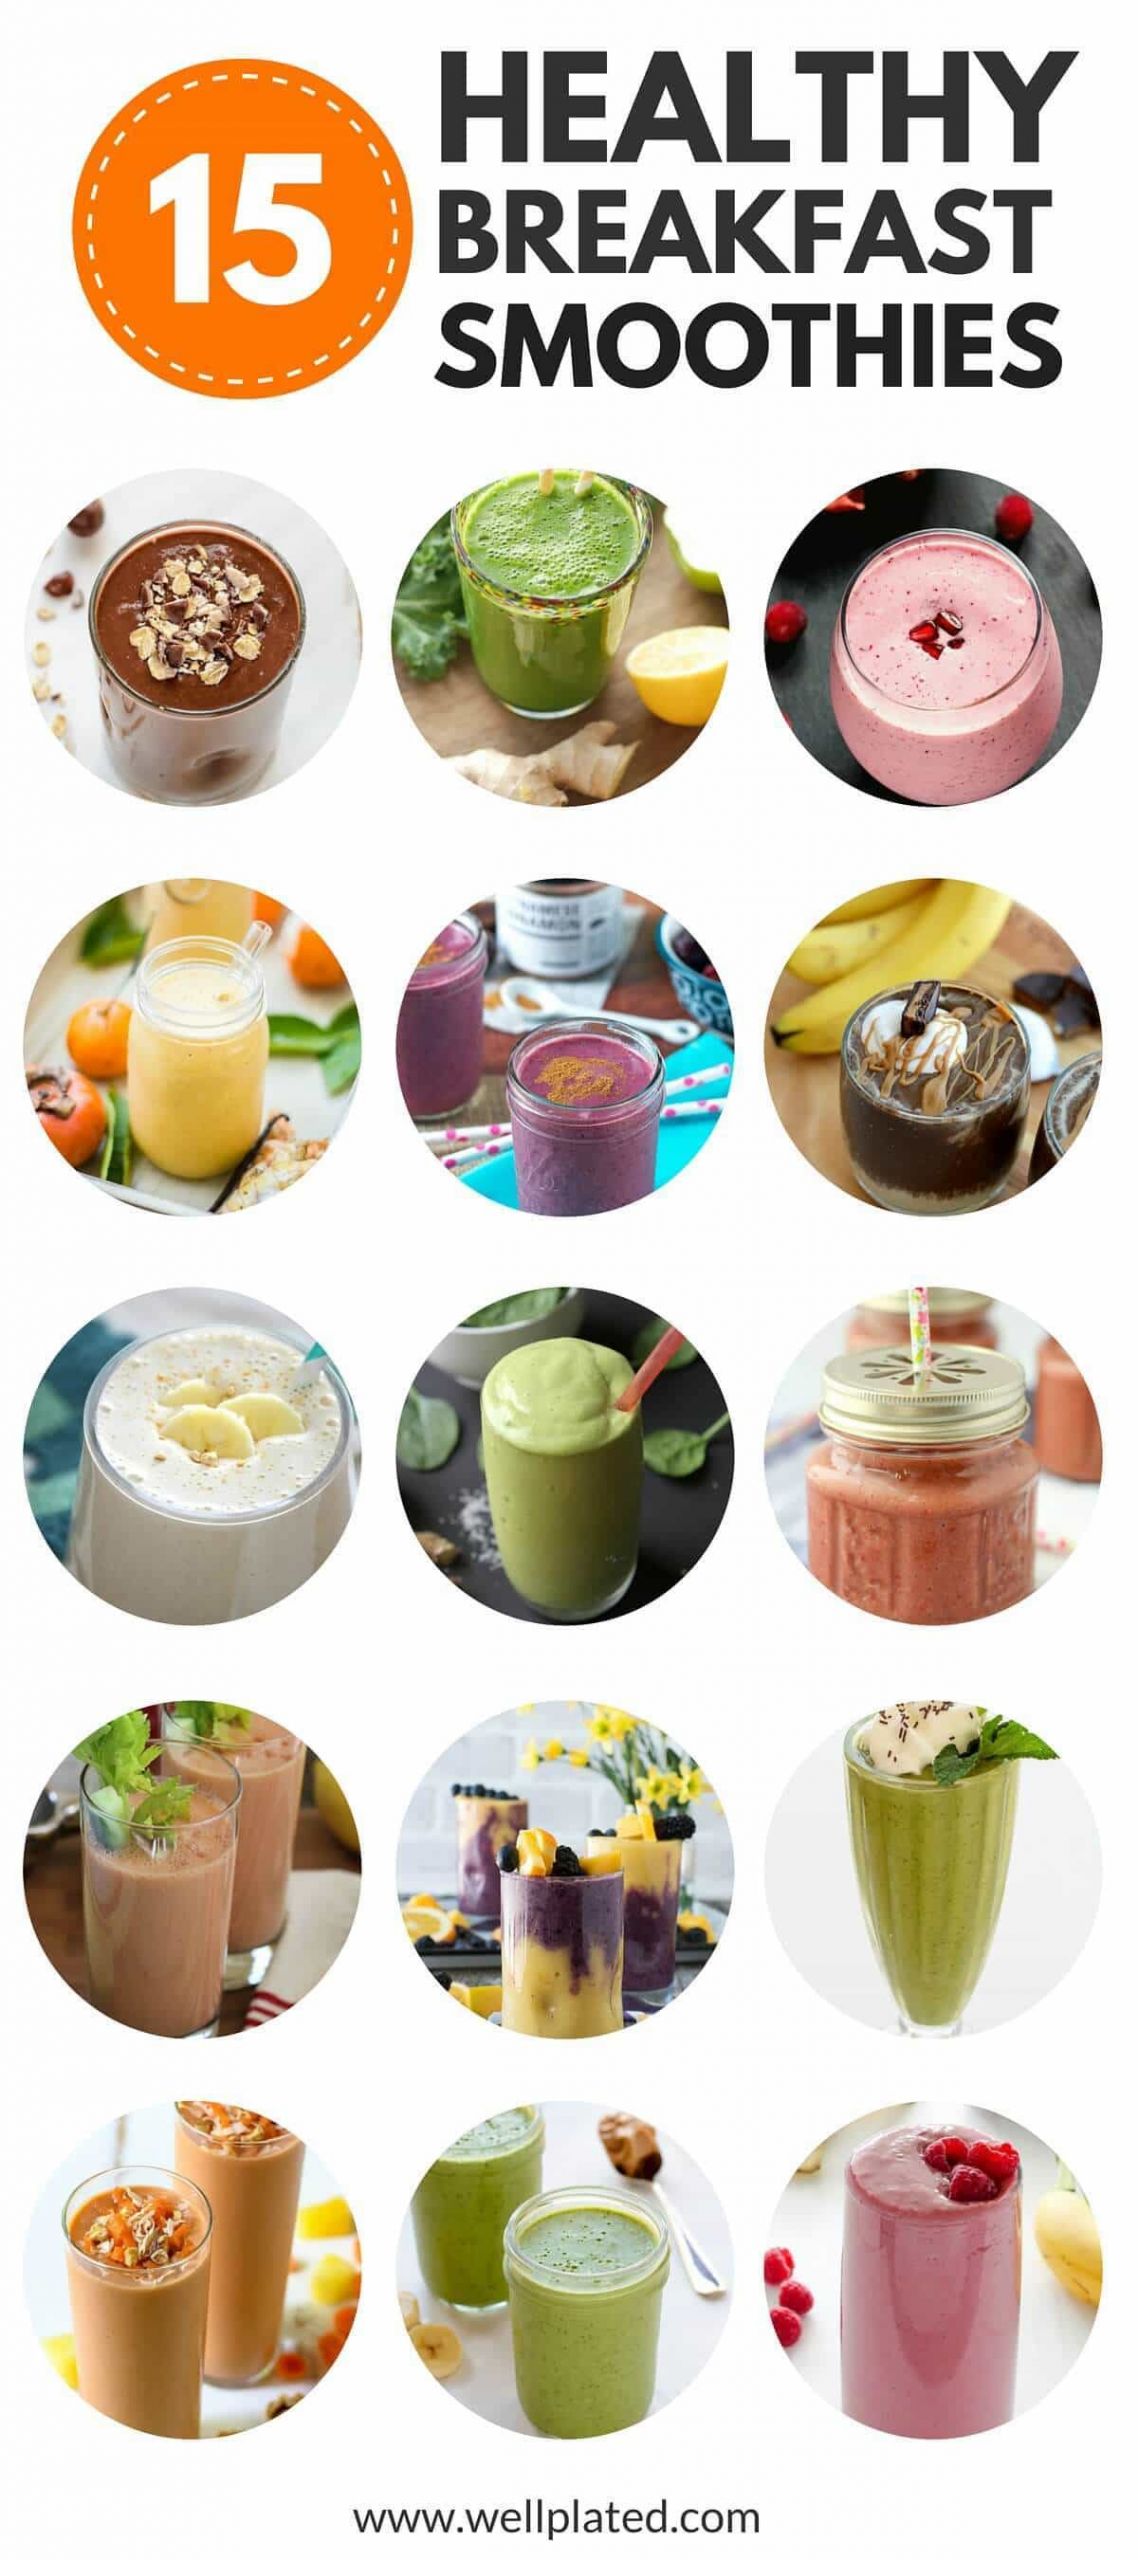 Morning Smoothie Recipes
 The Best 15 Healthy Breakfast Smoothies